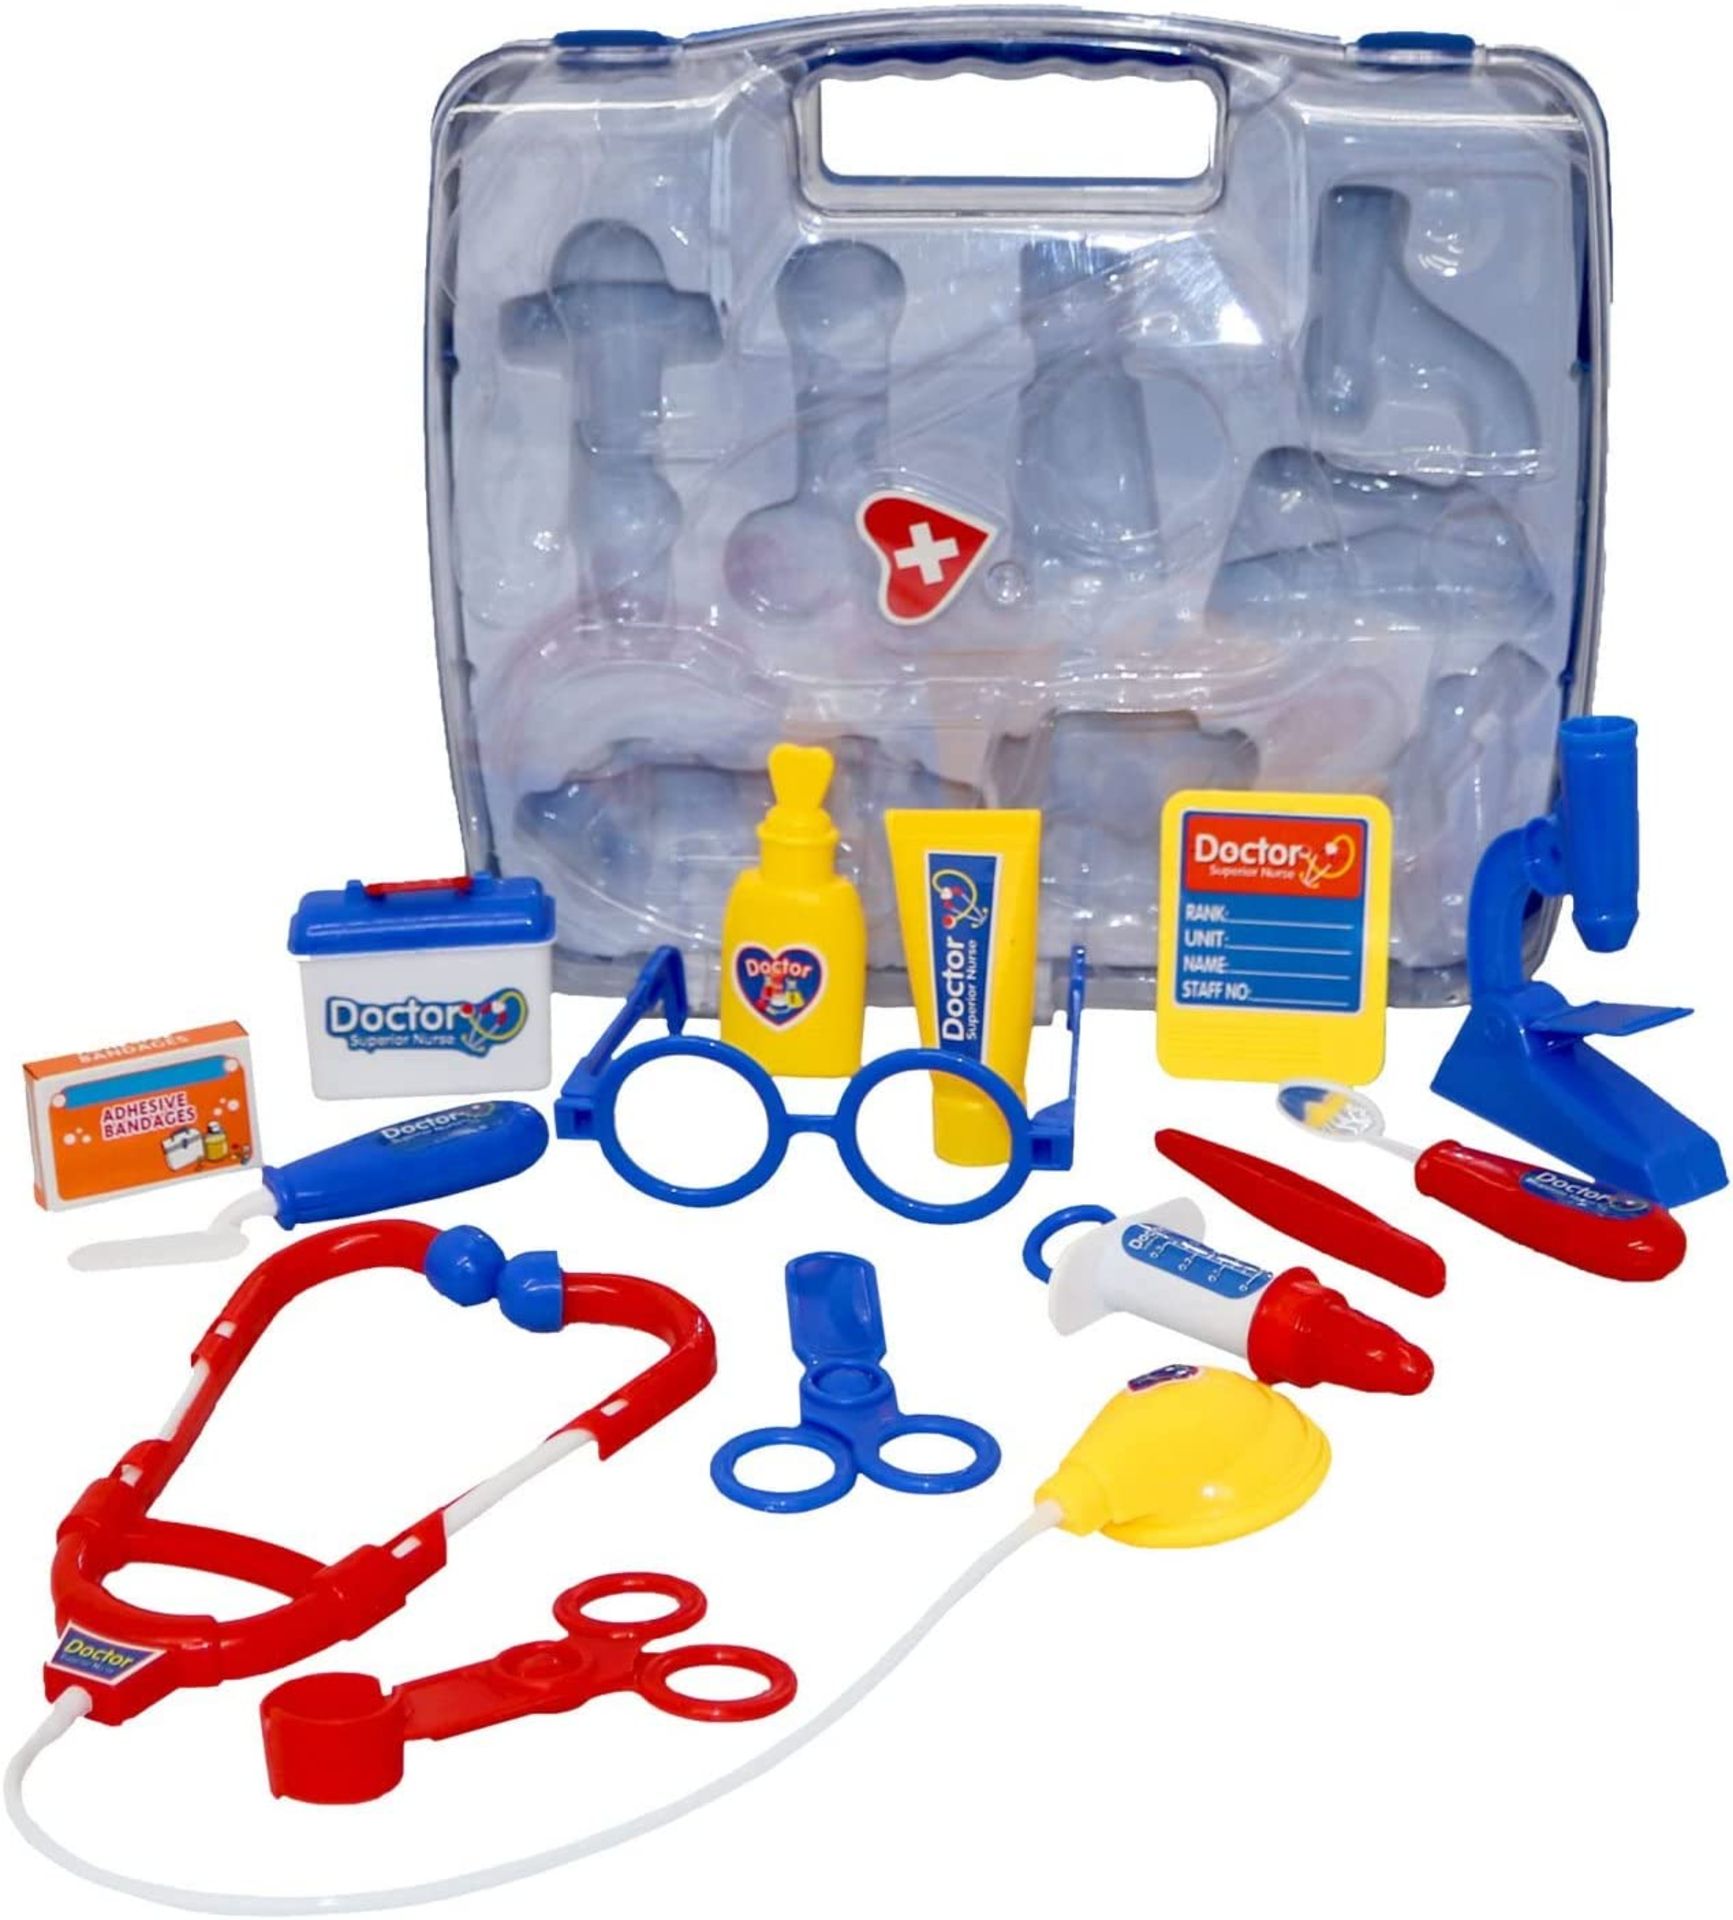 10 X BRAND NEW Blue Childrens Kids Role Play Doctor Nurses Toy Set Medical Kit (3622) R10-8